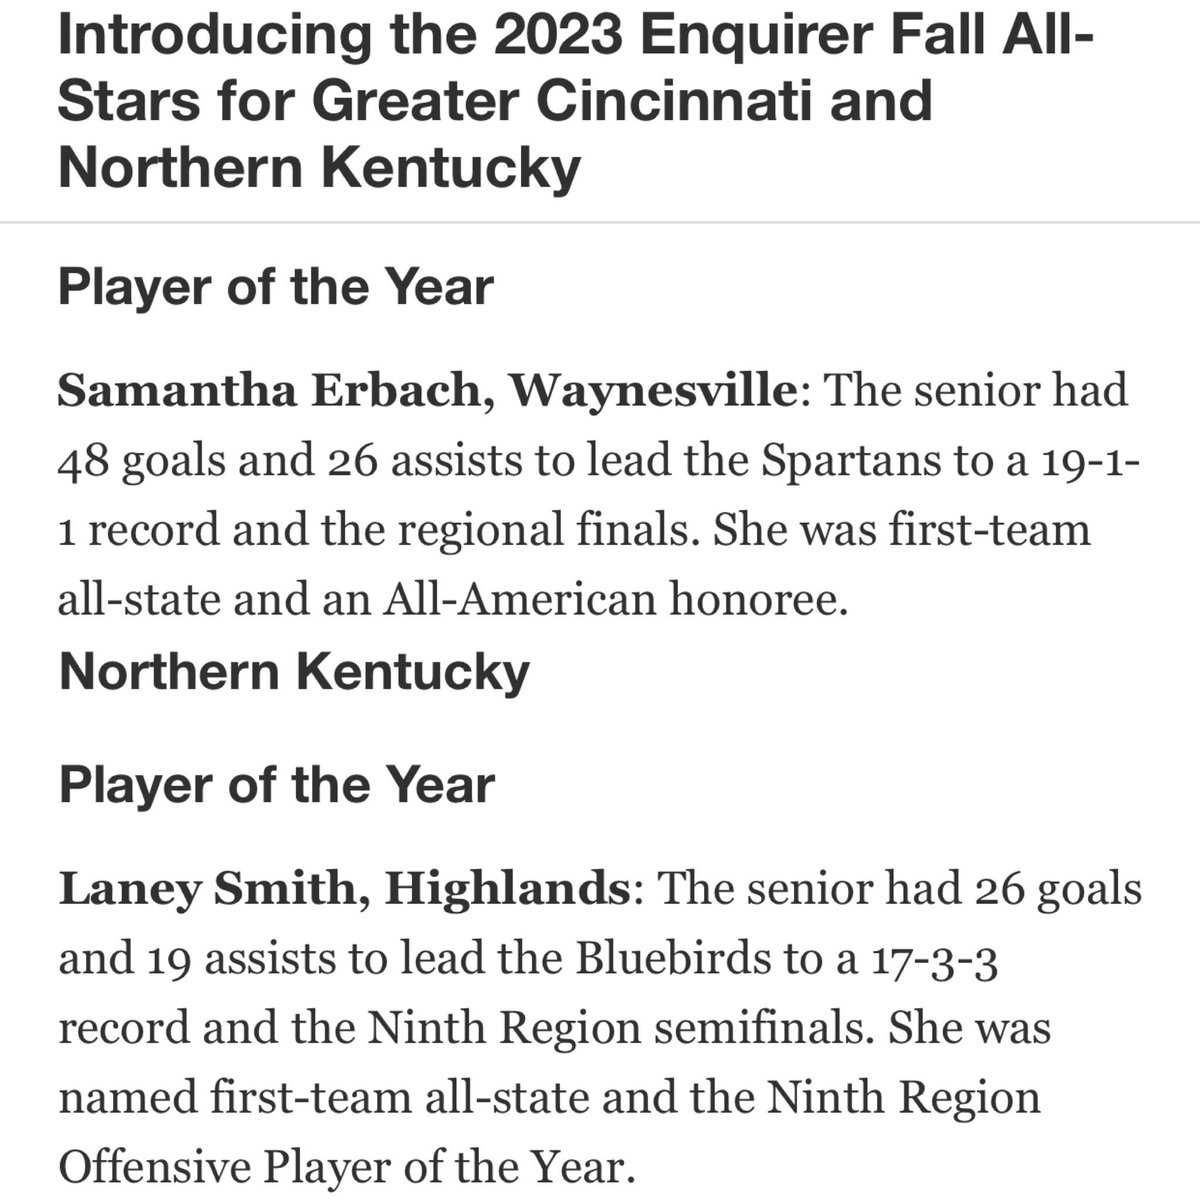 Congrats to @laneysmith132 and @ErbachSamantha for being named Soccer Players of the Year. Laney for N. kentucky and Sam for Cincinnati. Sam was also named runner of the year. And to all our Cincy girls for their 1st & 2nd team recognition. Each of our area girls was recognized!